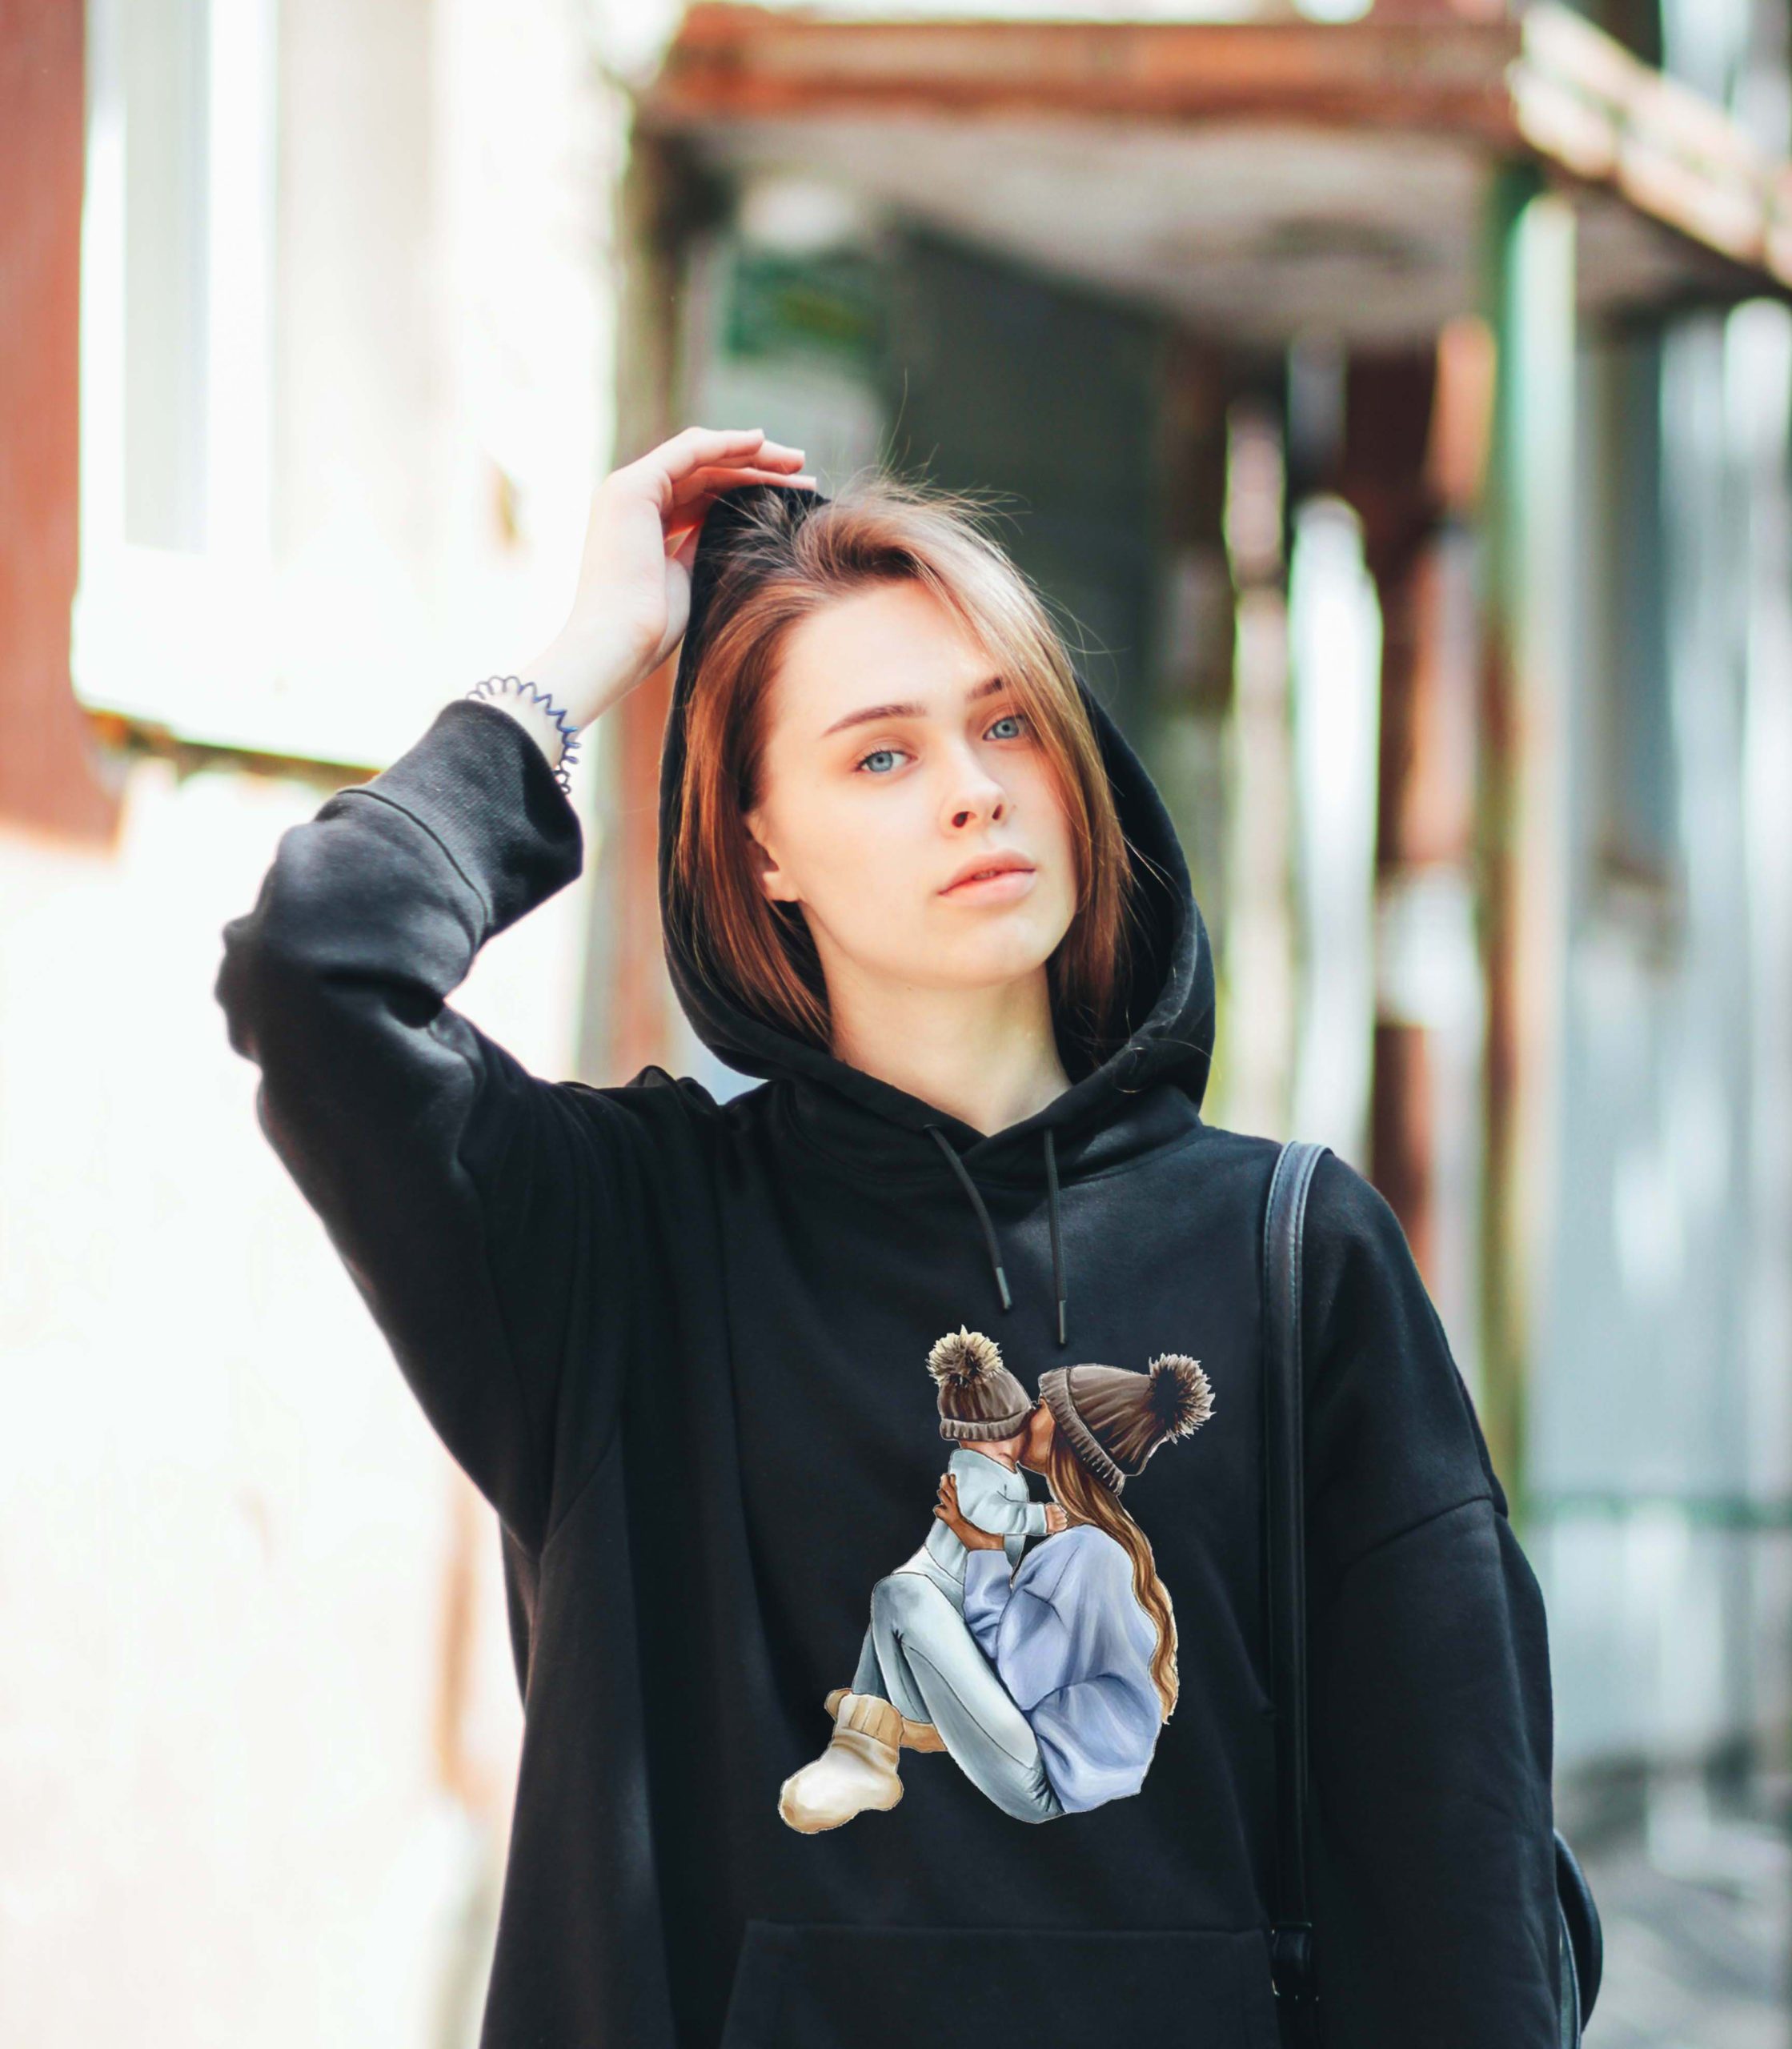 Candid portrait of young beautiful long hair girl fashion model hipster in black hoody on the city street